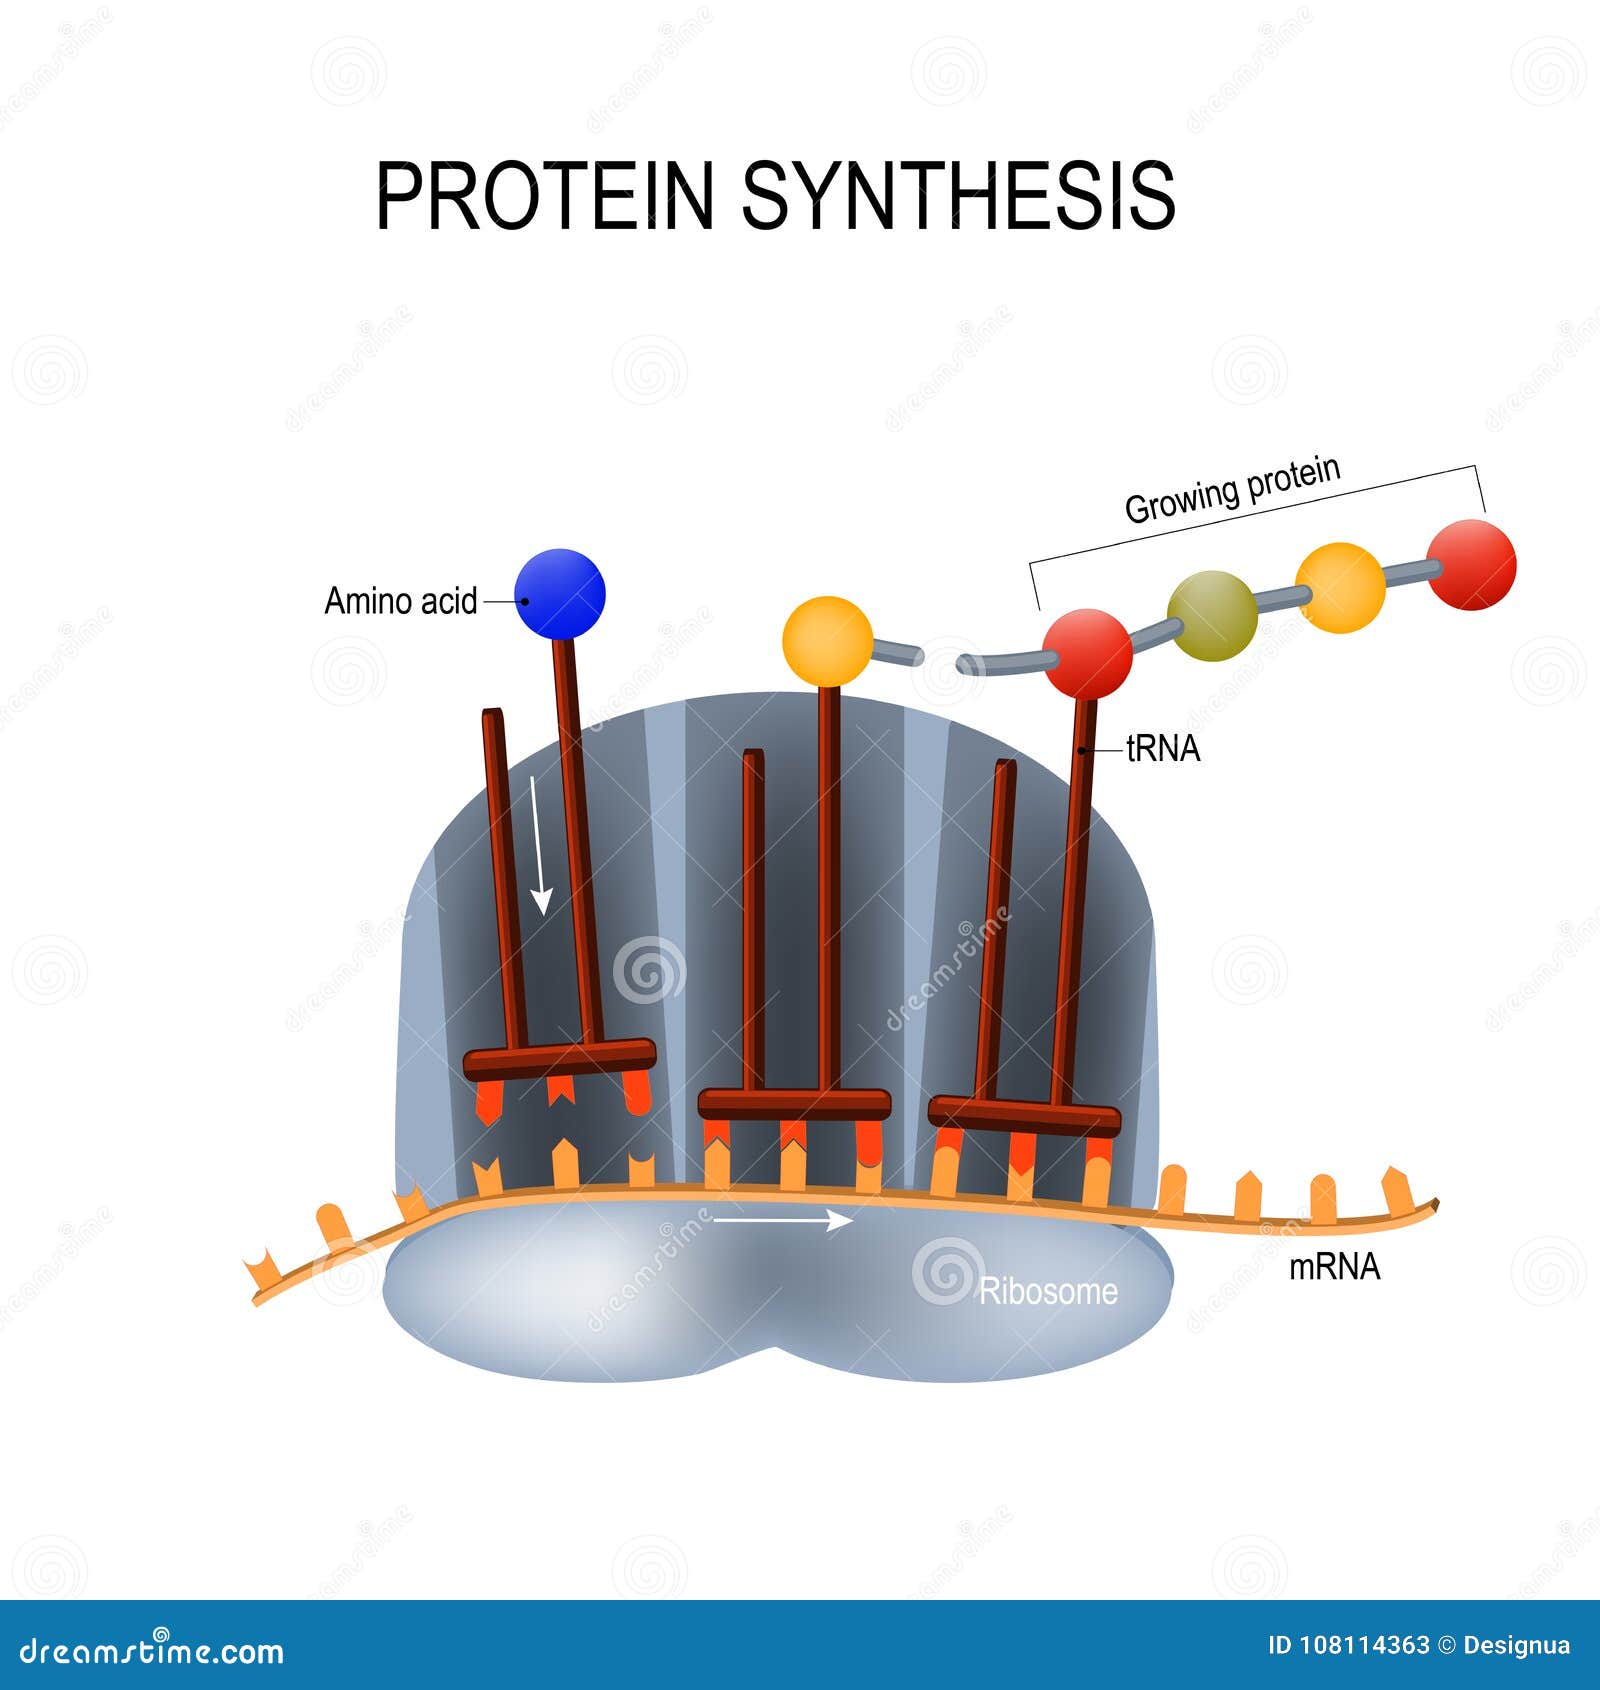 protein synthesis. ribosome assemble protein molecules.